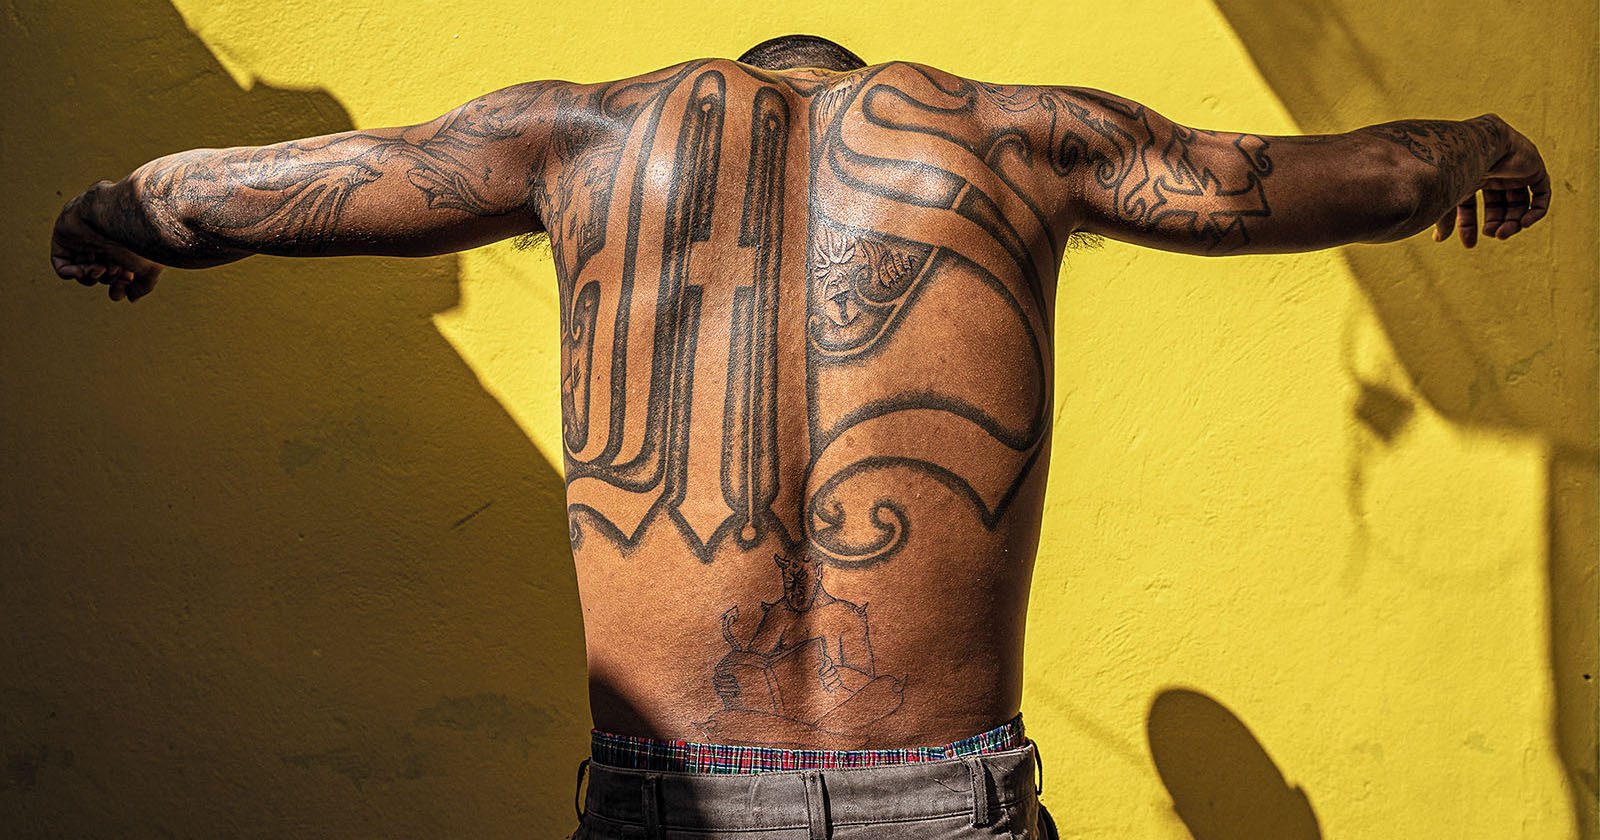 MS gang member showing his tattoo on his back.